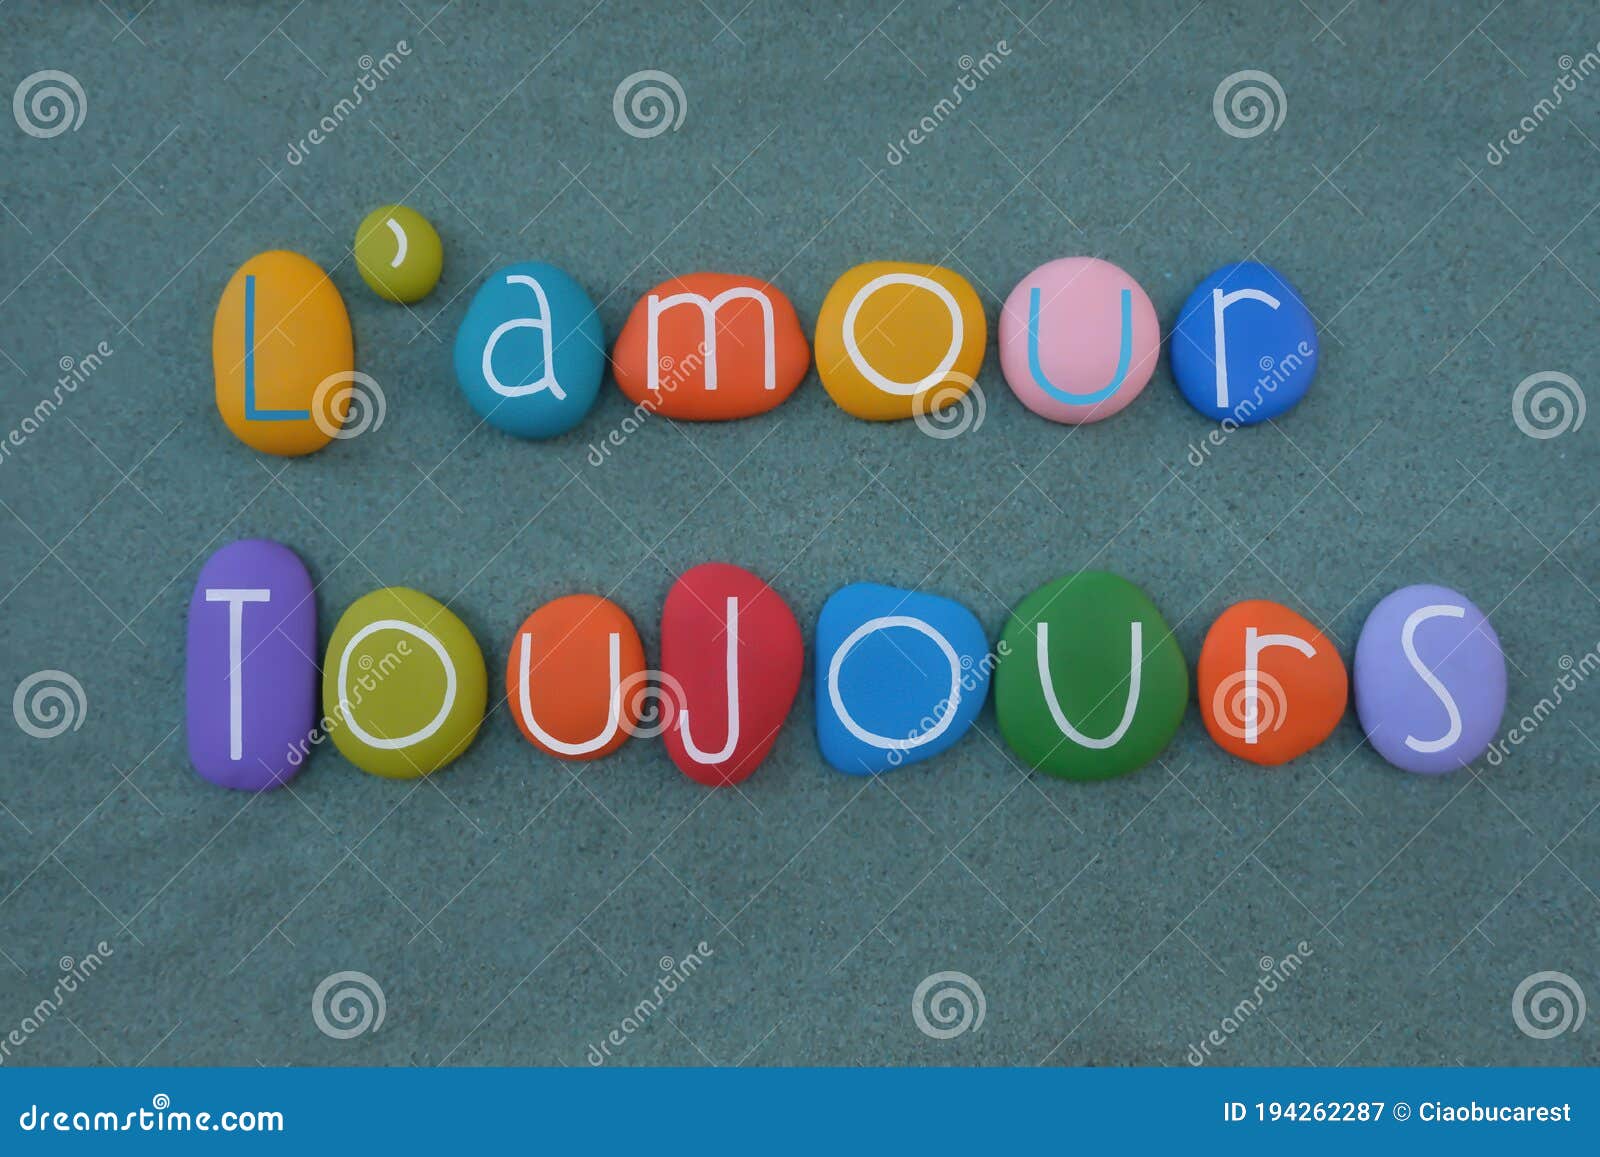 l`amour toujours, french phrase meaning love always composed with handmade multicolored stone letters over green sand